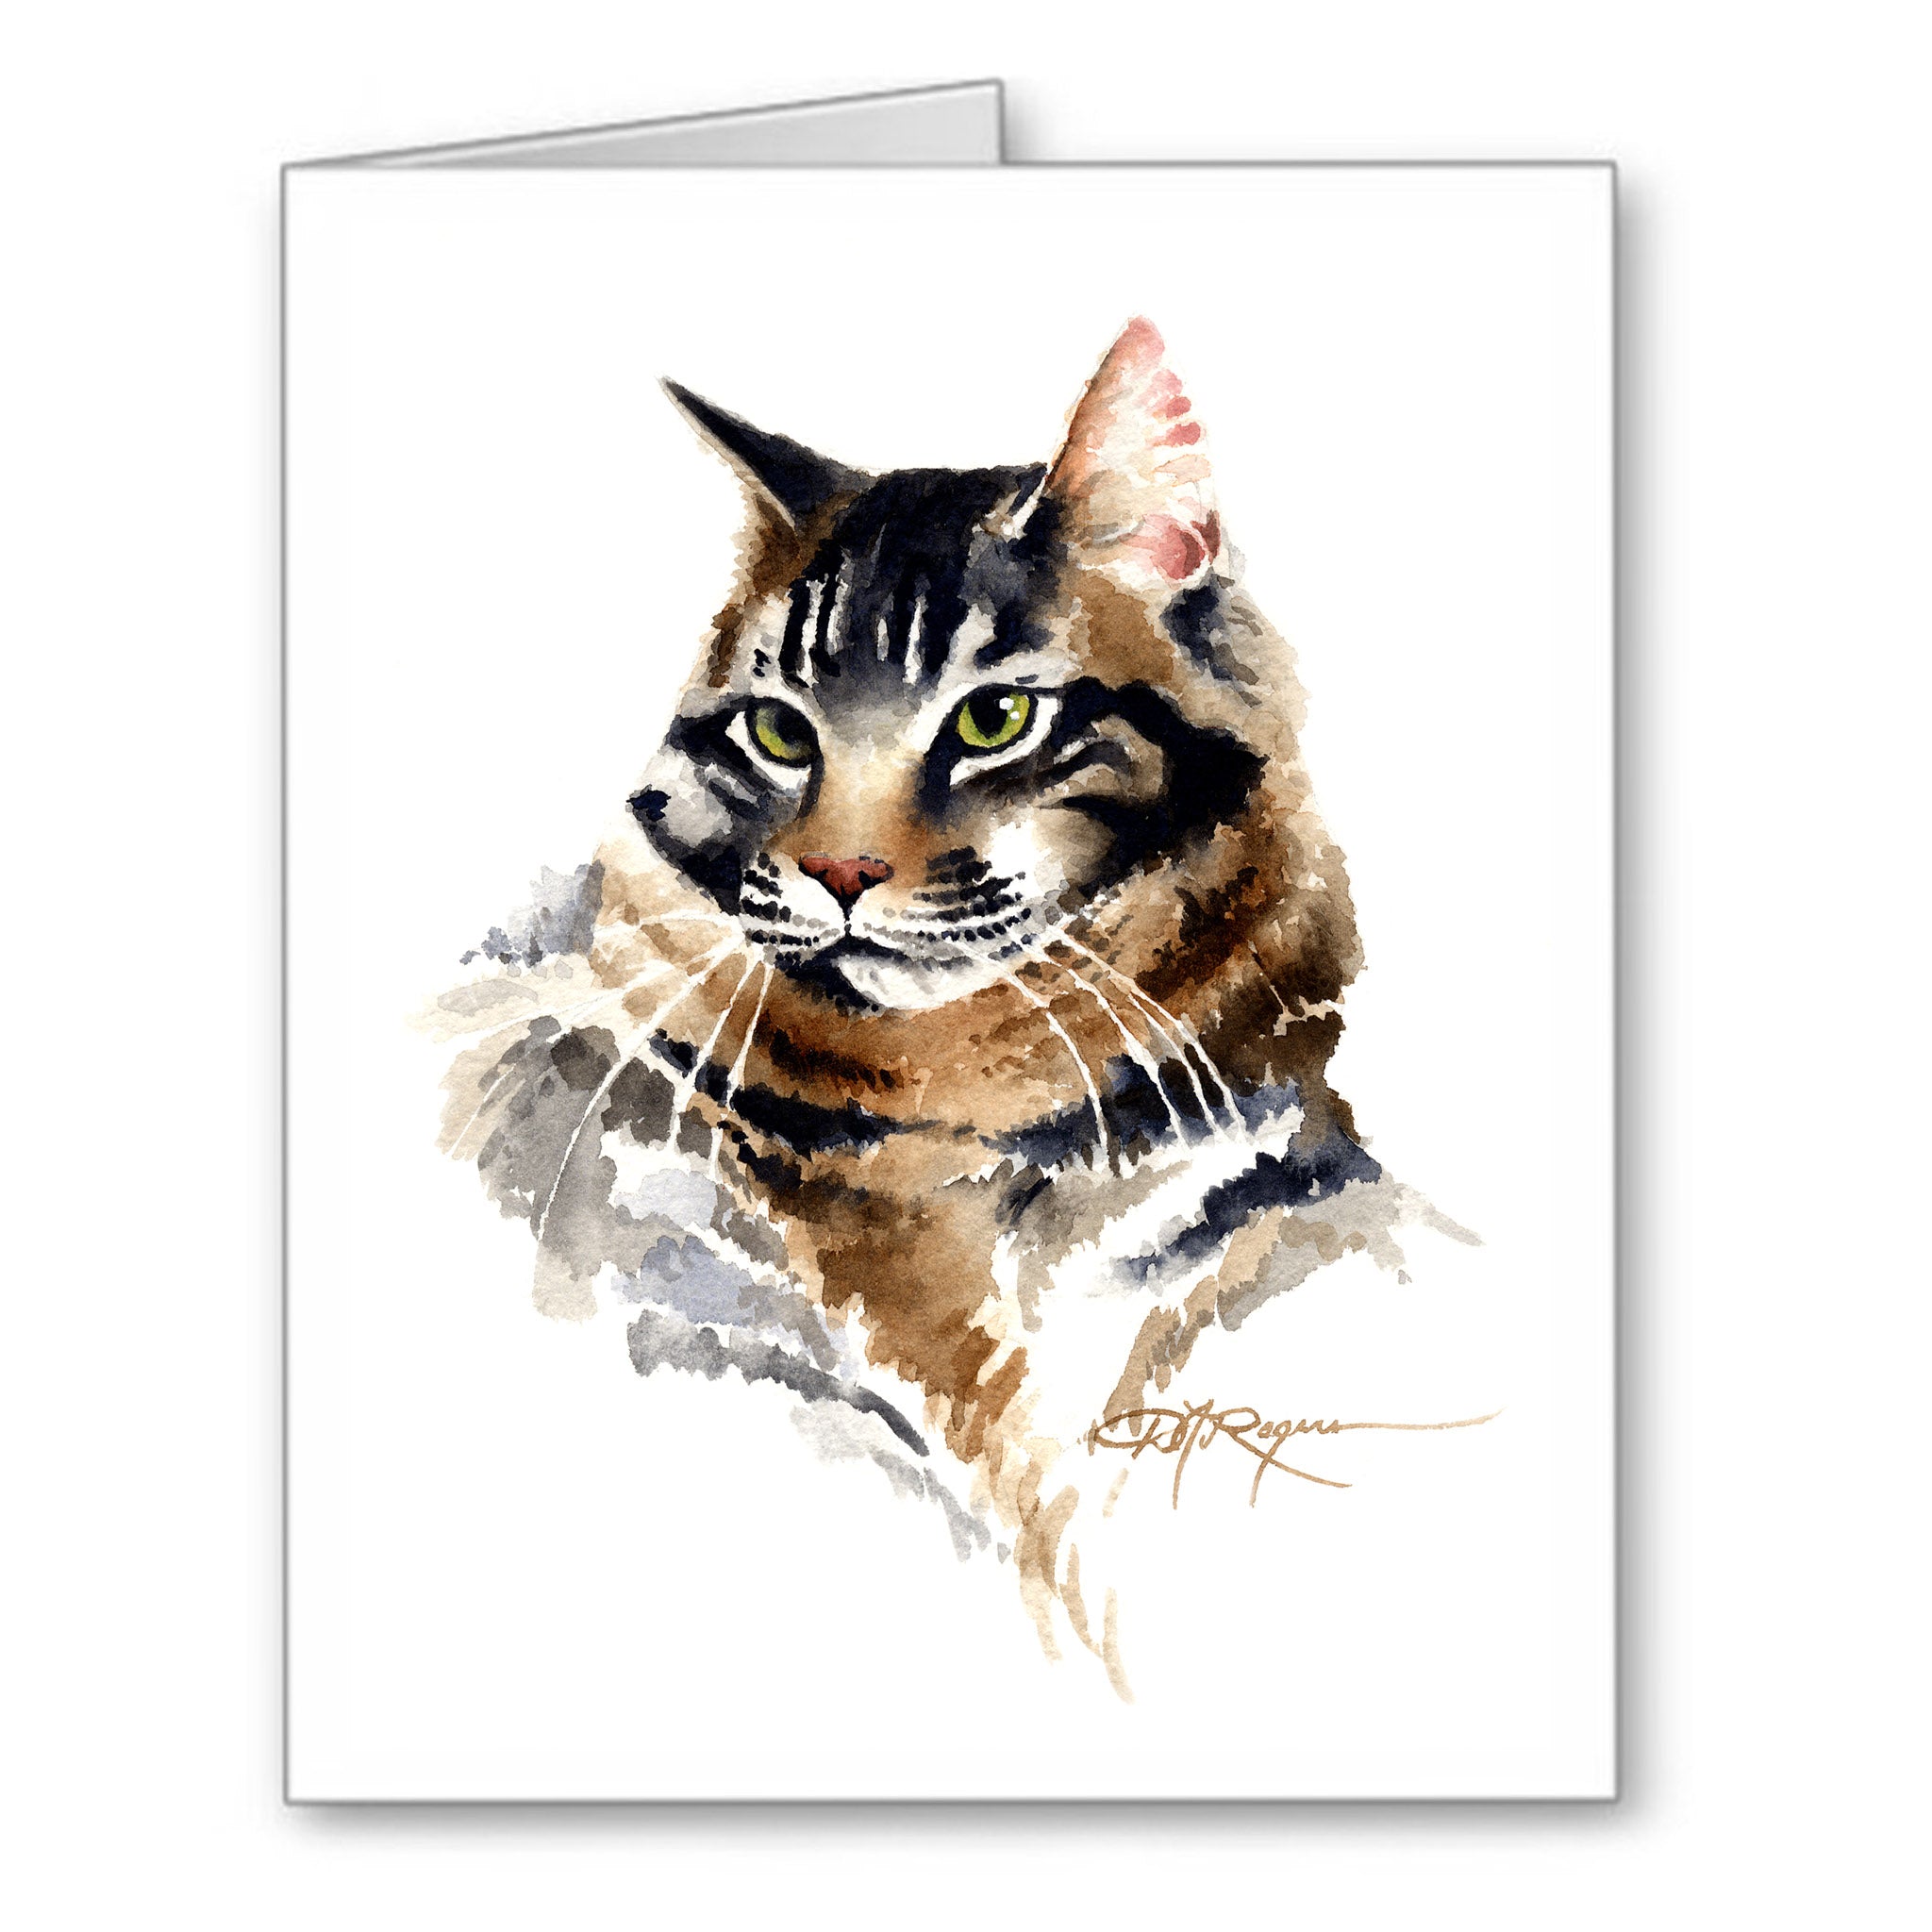 Cat Traditional Watercolor Note Card Art by Artist DJ Rogers